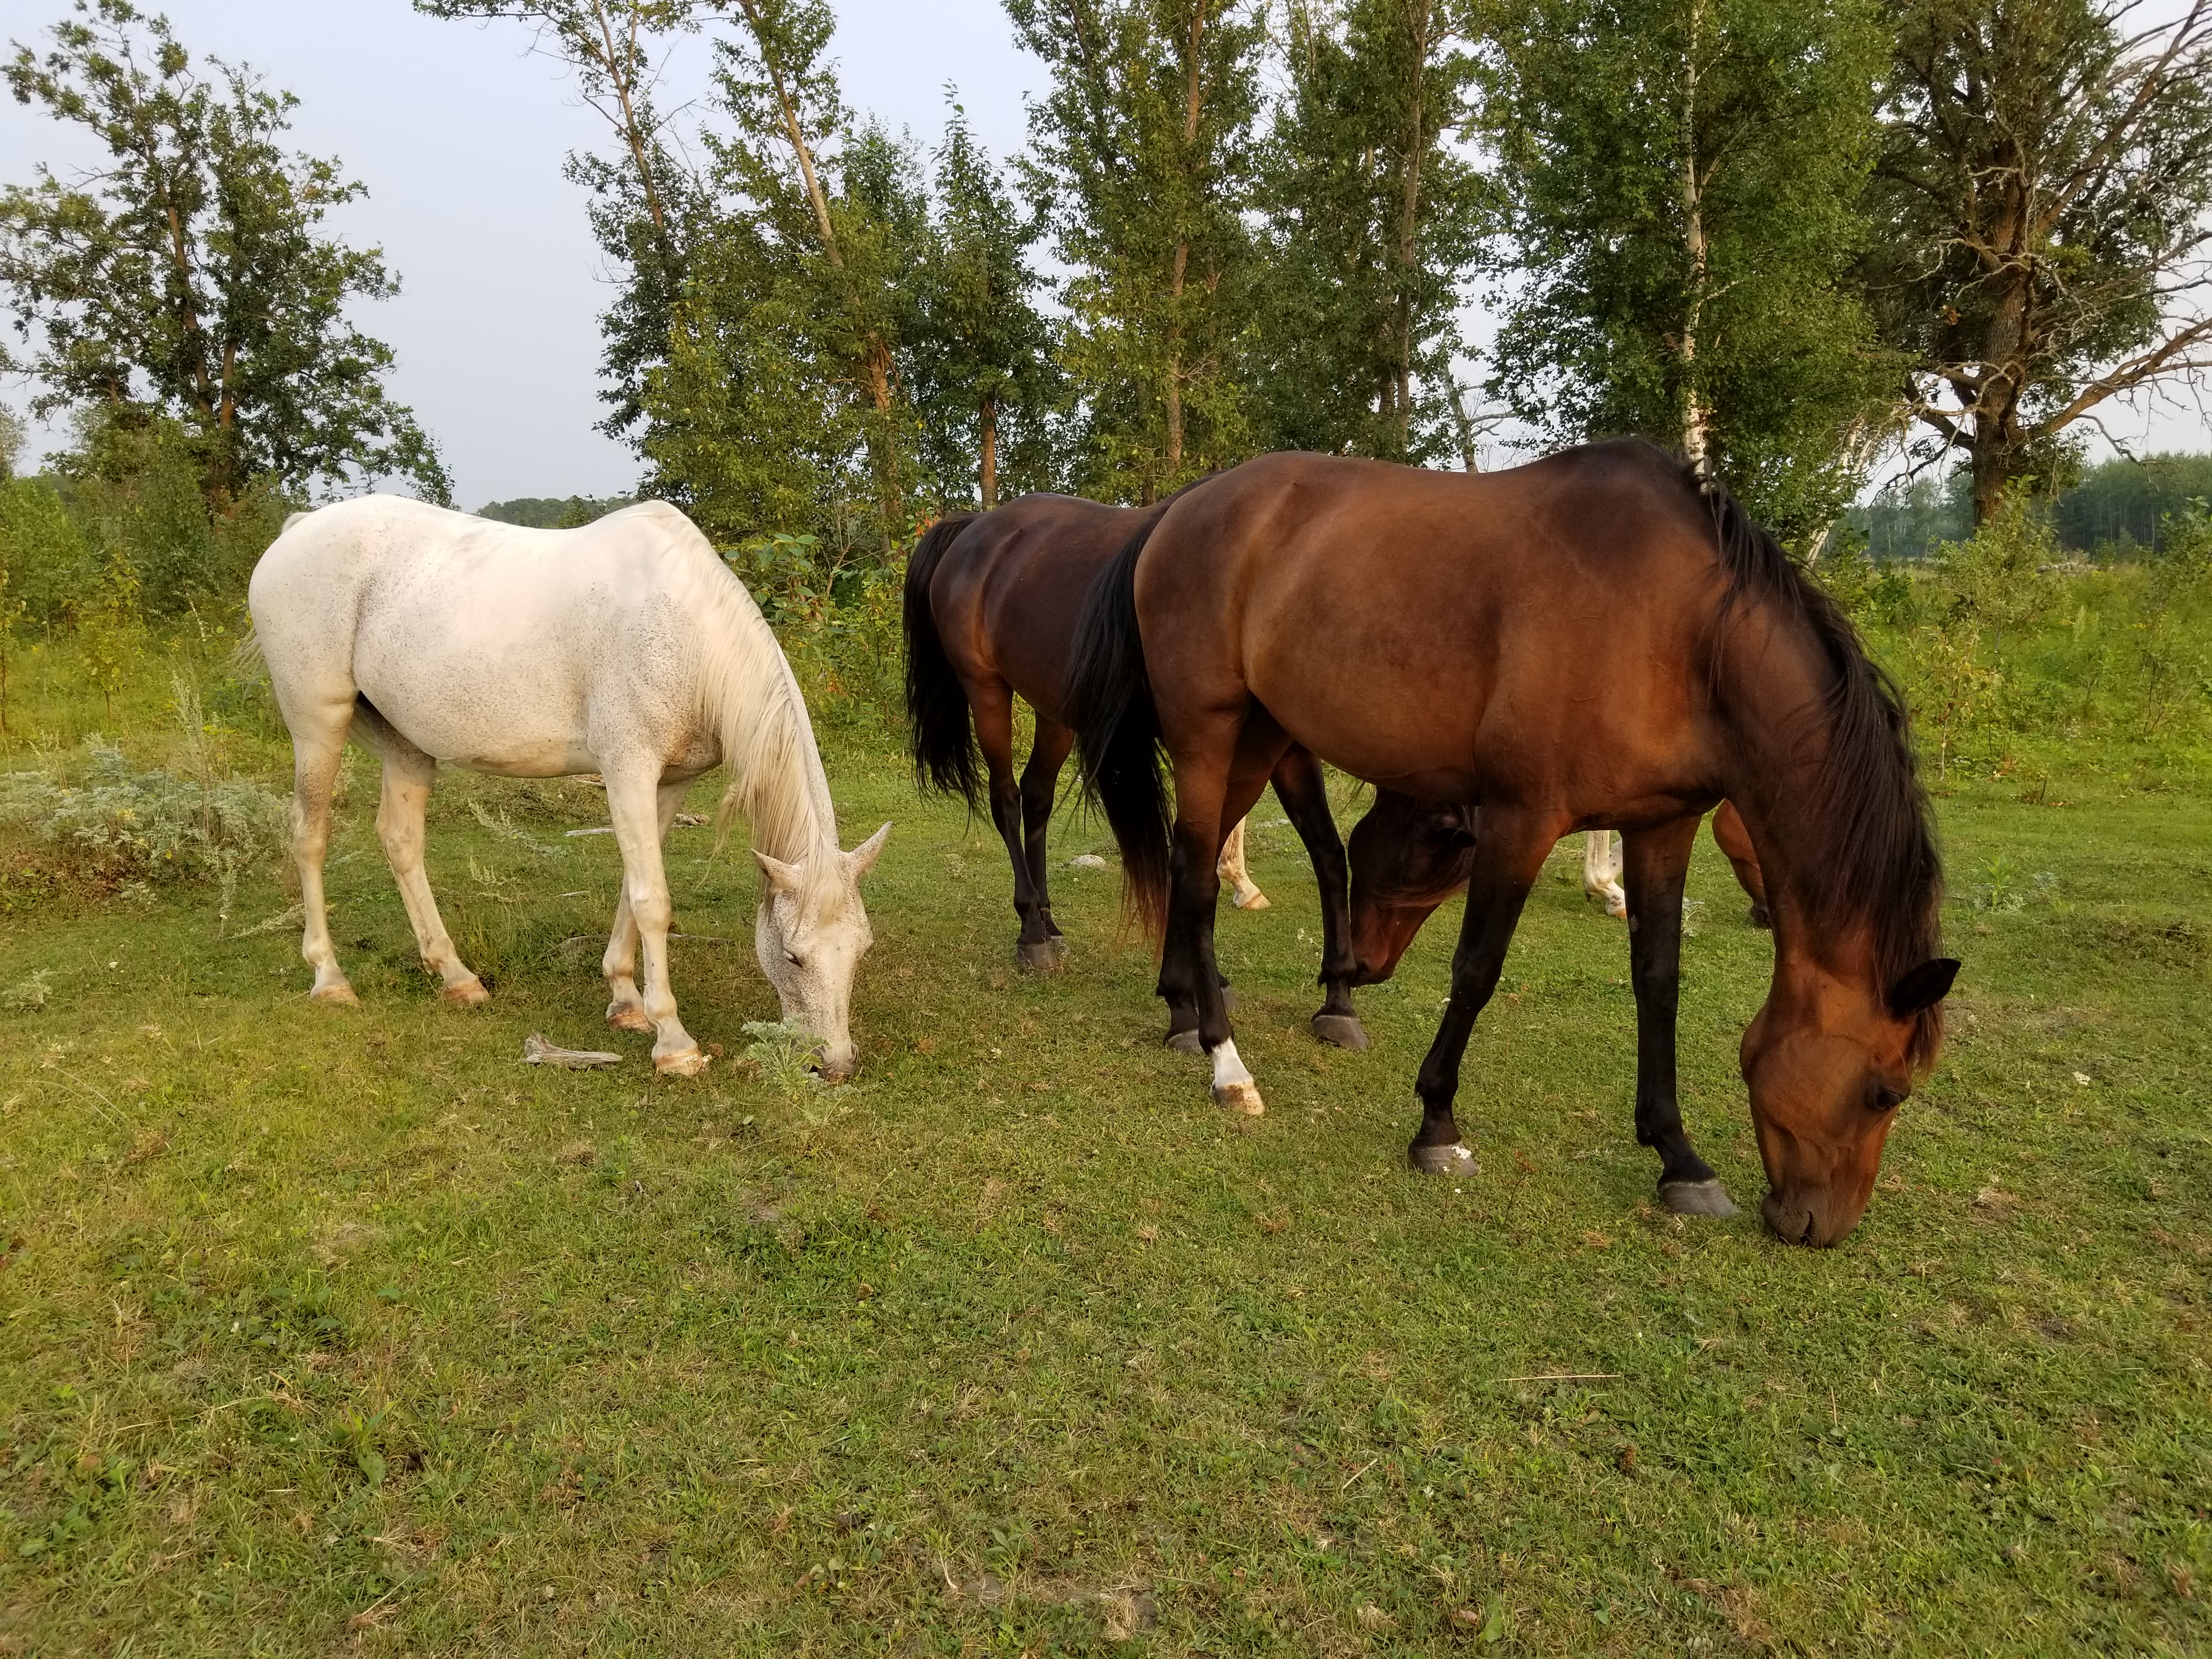 Horses in a pasture.